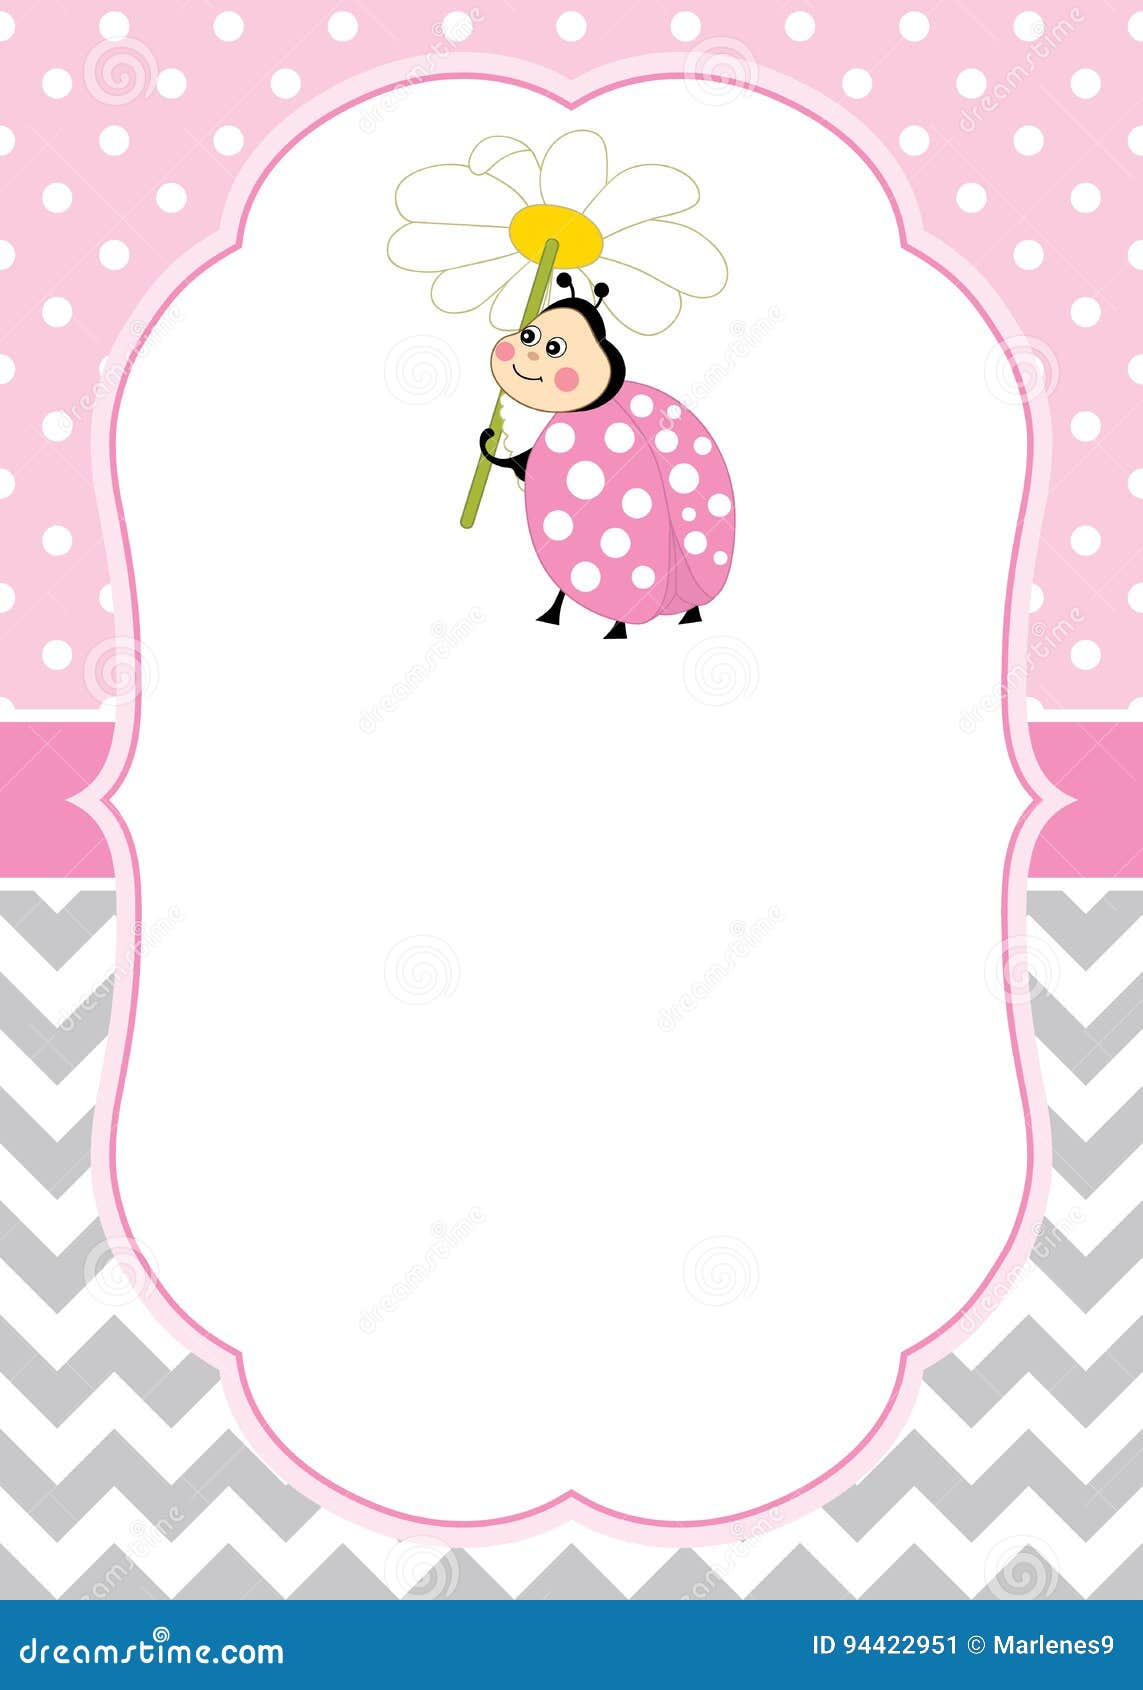  card template with a cute ladybug on chevron and polka dot background.